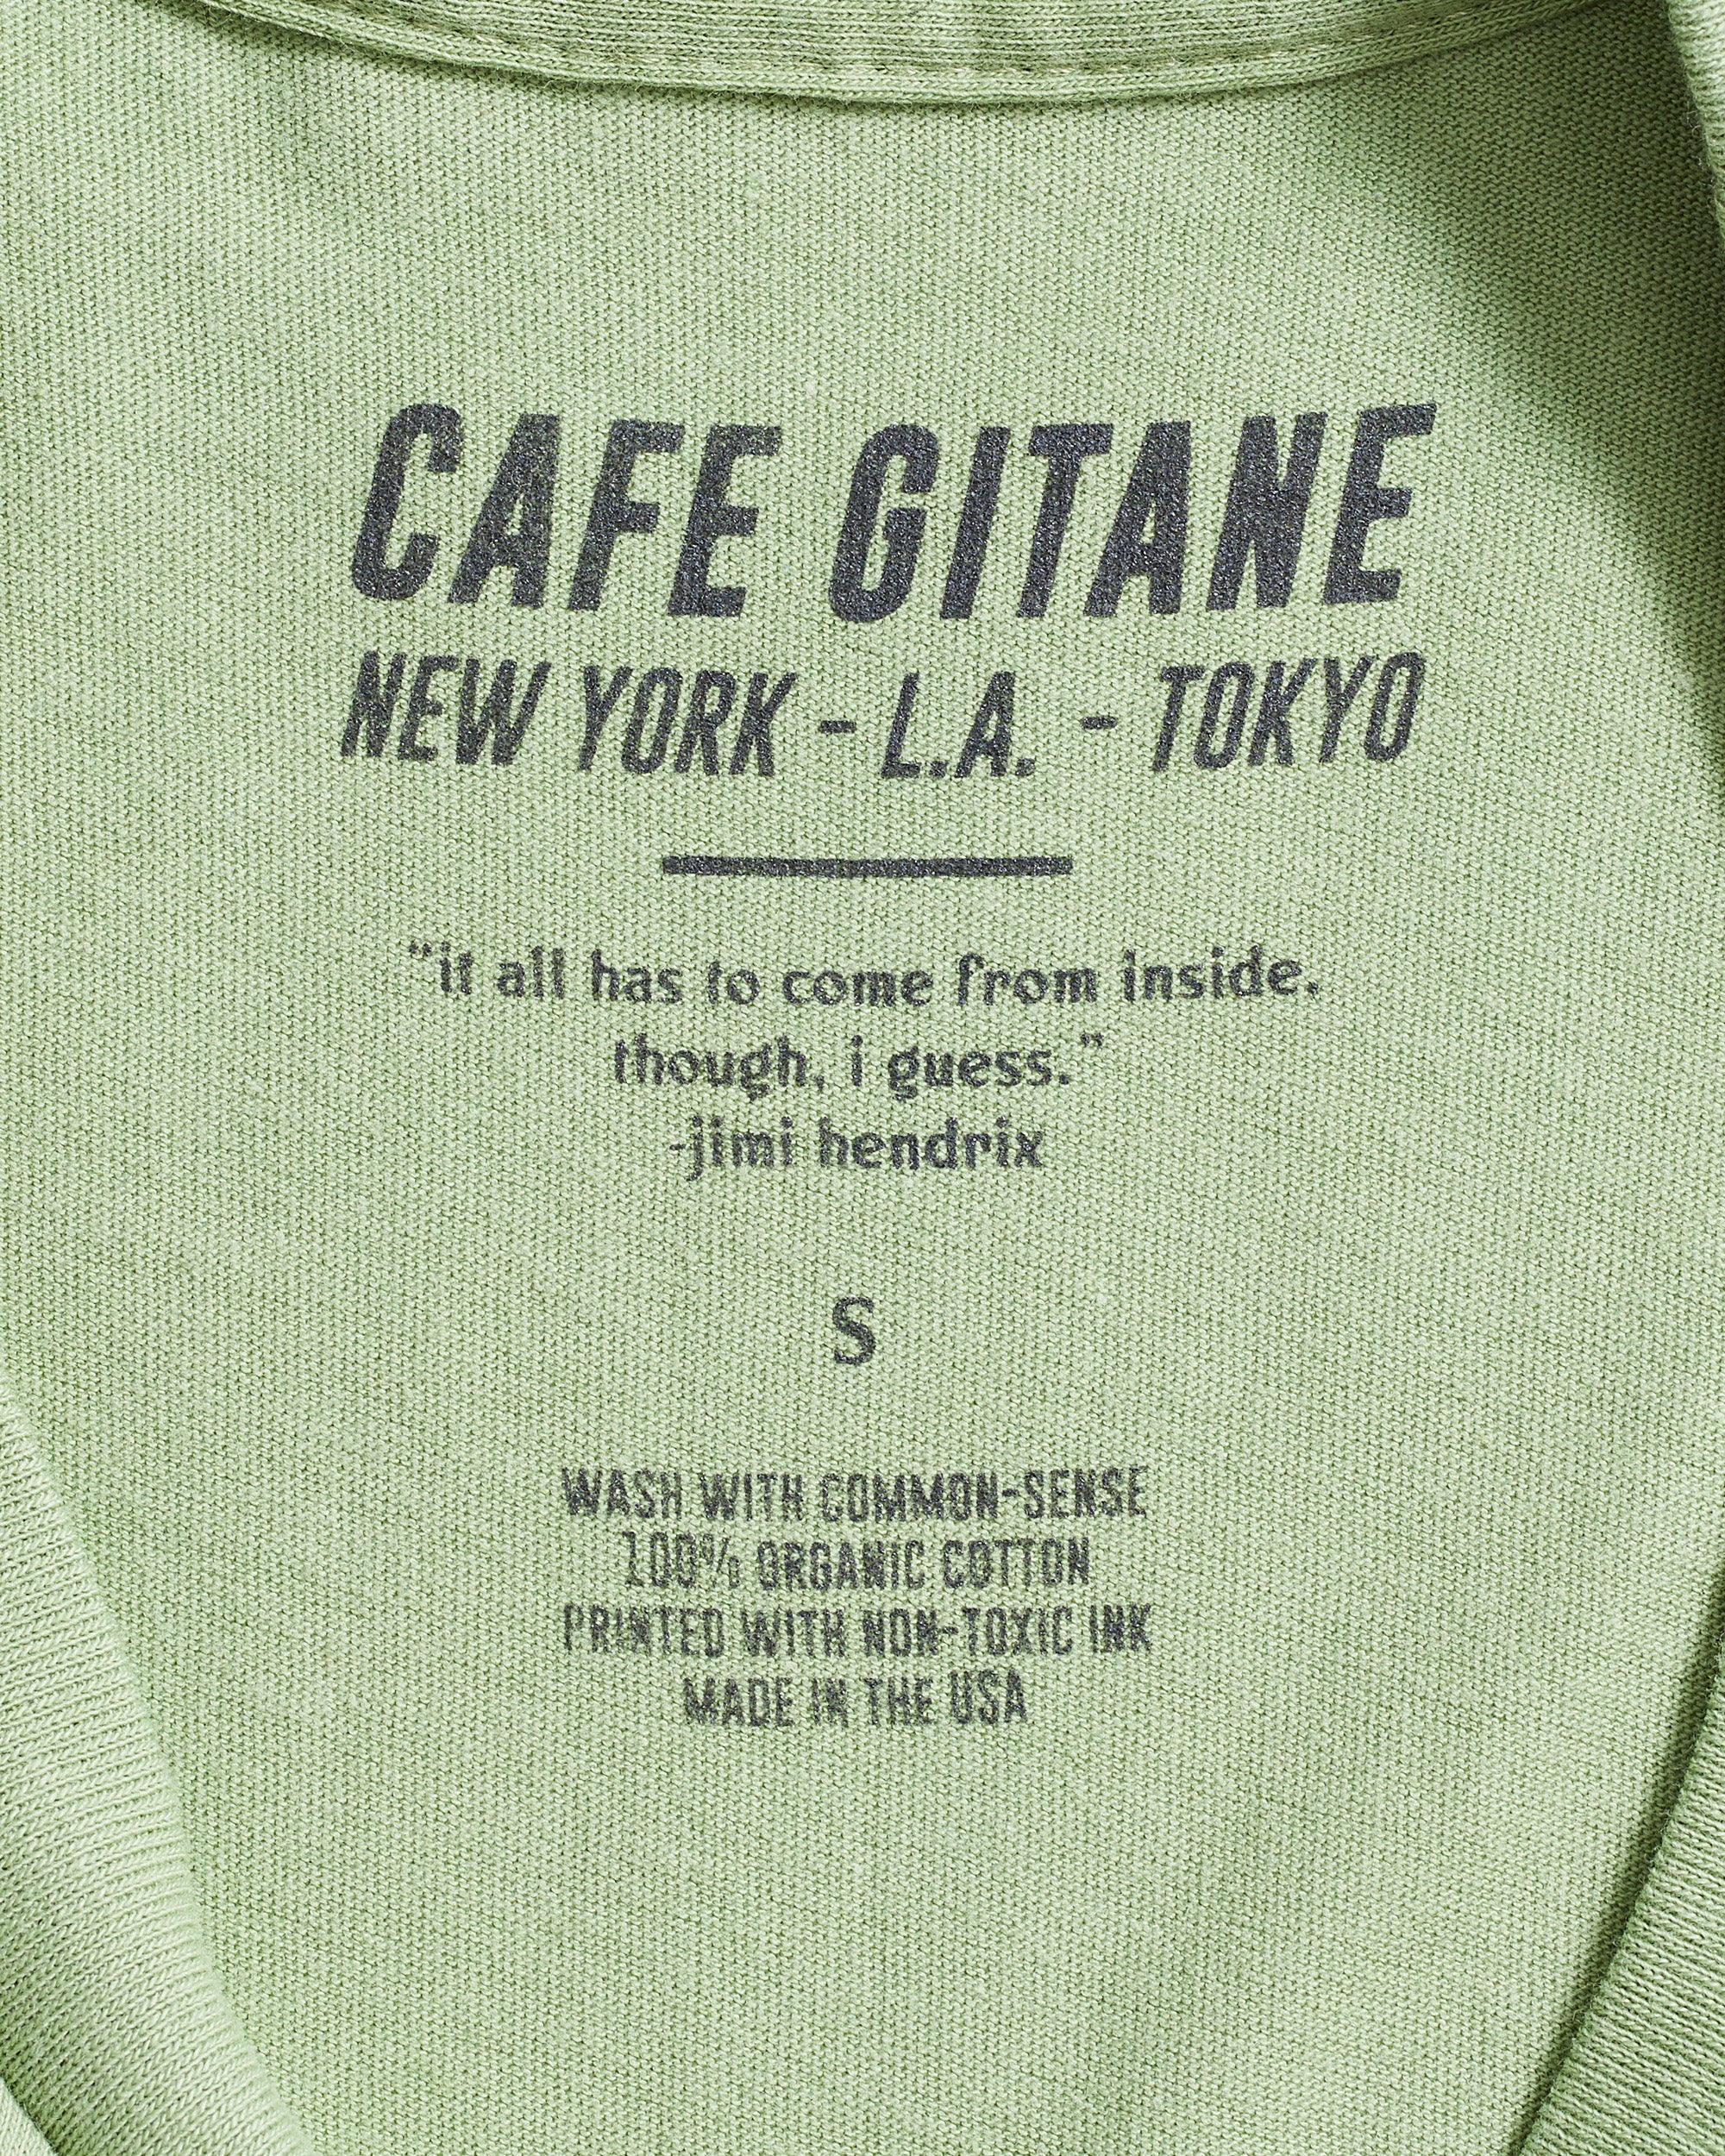 The Cafe Gitane 100% organic cotton t-shirt in green has a printed inside tag. It show the care instruction, that it is made in the USA and includes a Jimi Hendrix Quote.  It also has the Cafe Gitane logo and stated the cities it has locations in: New York, Los Angeles, and Tokyo. 